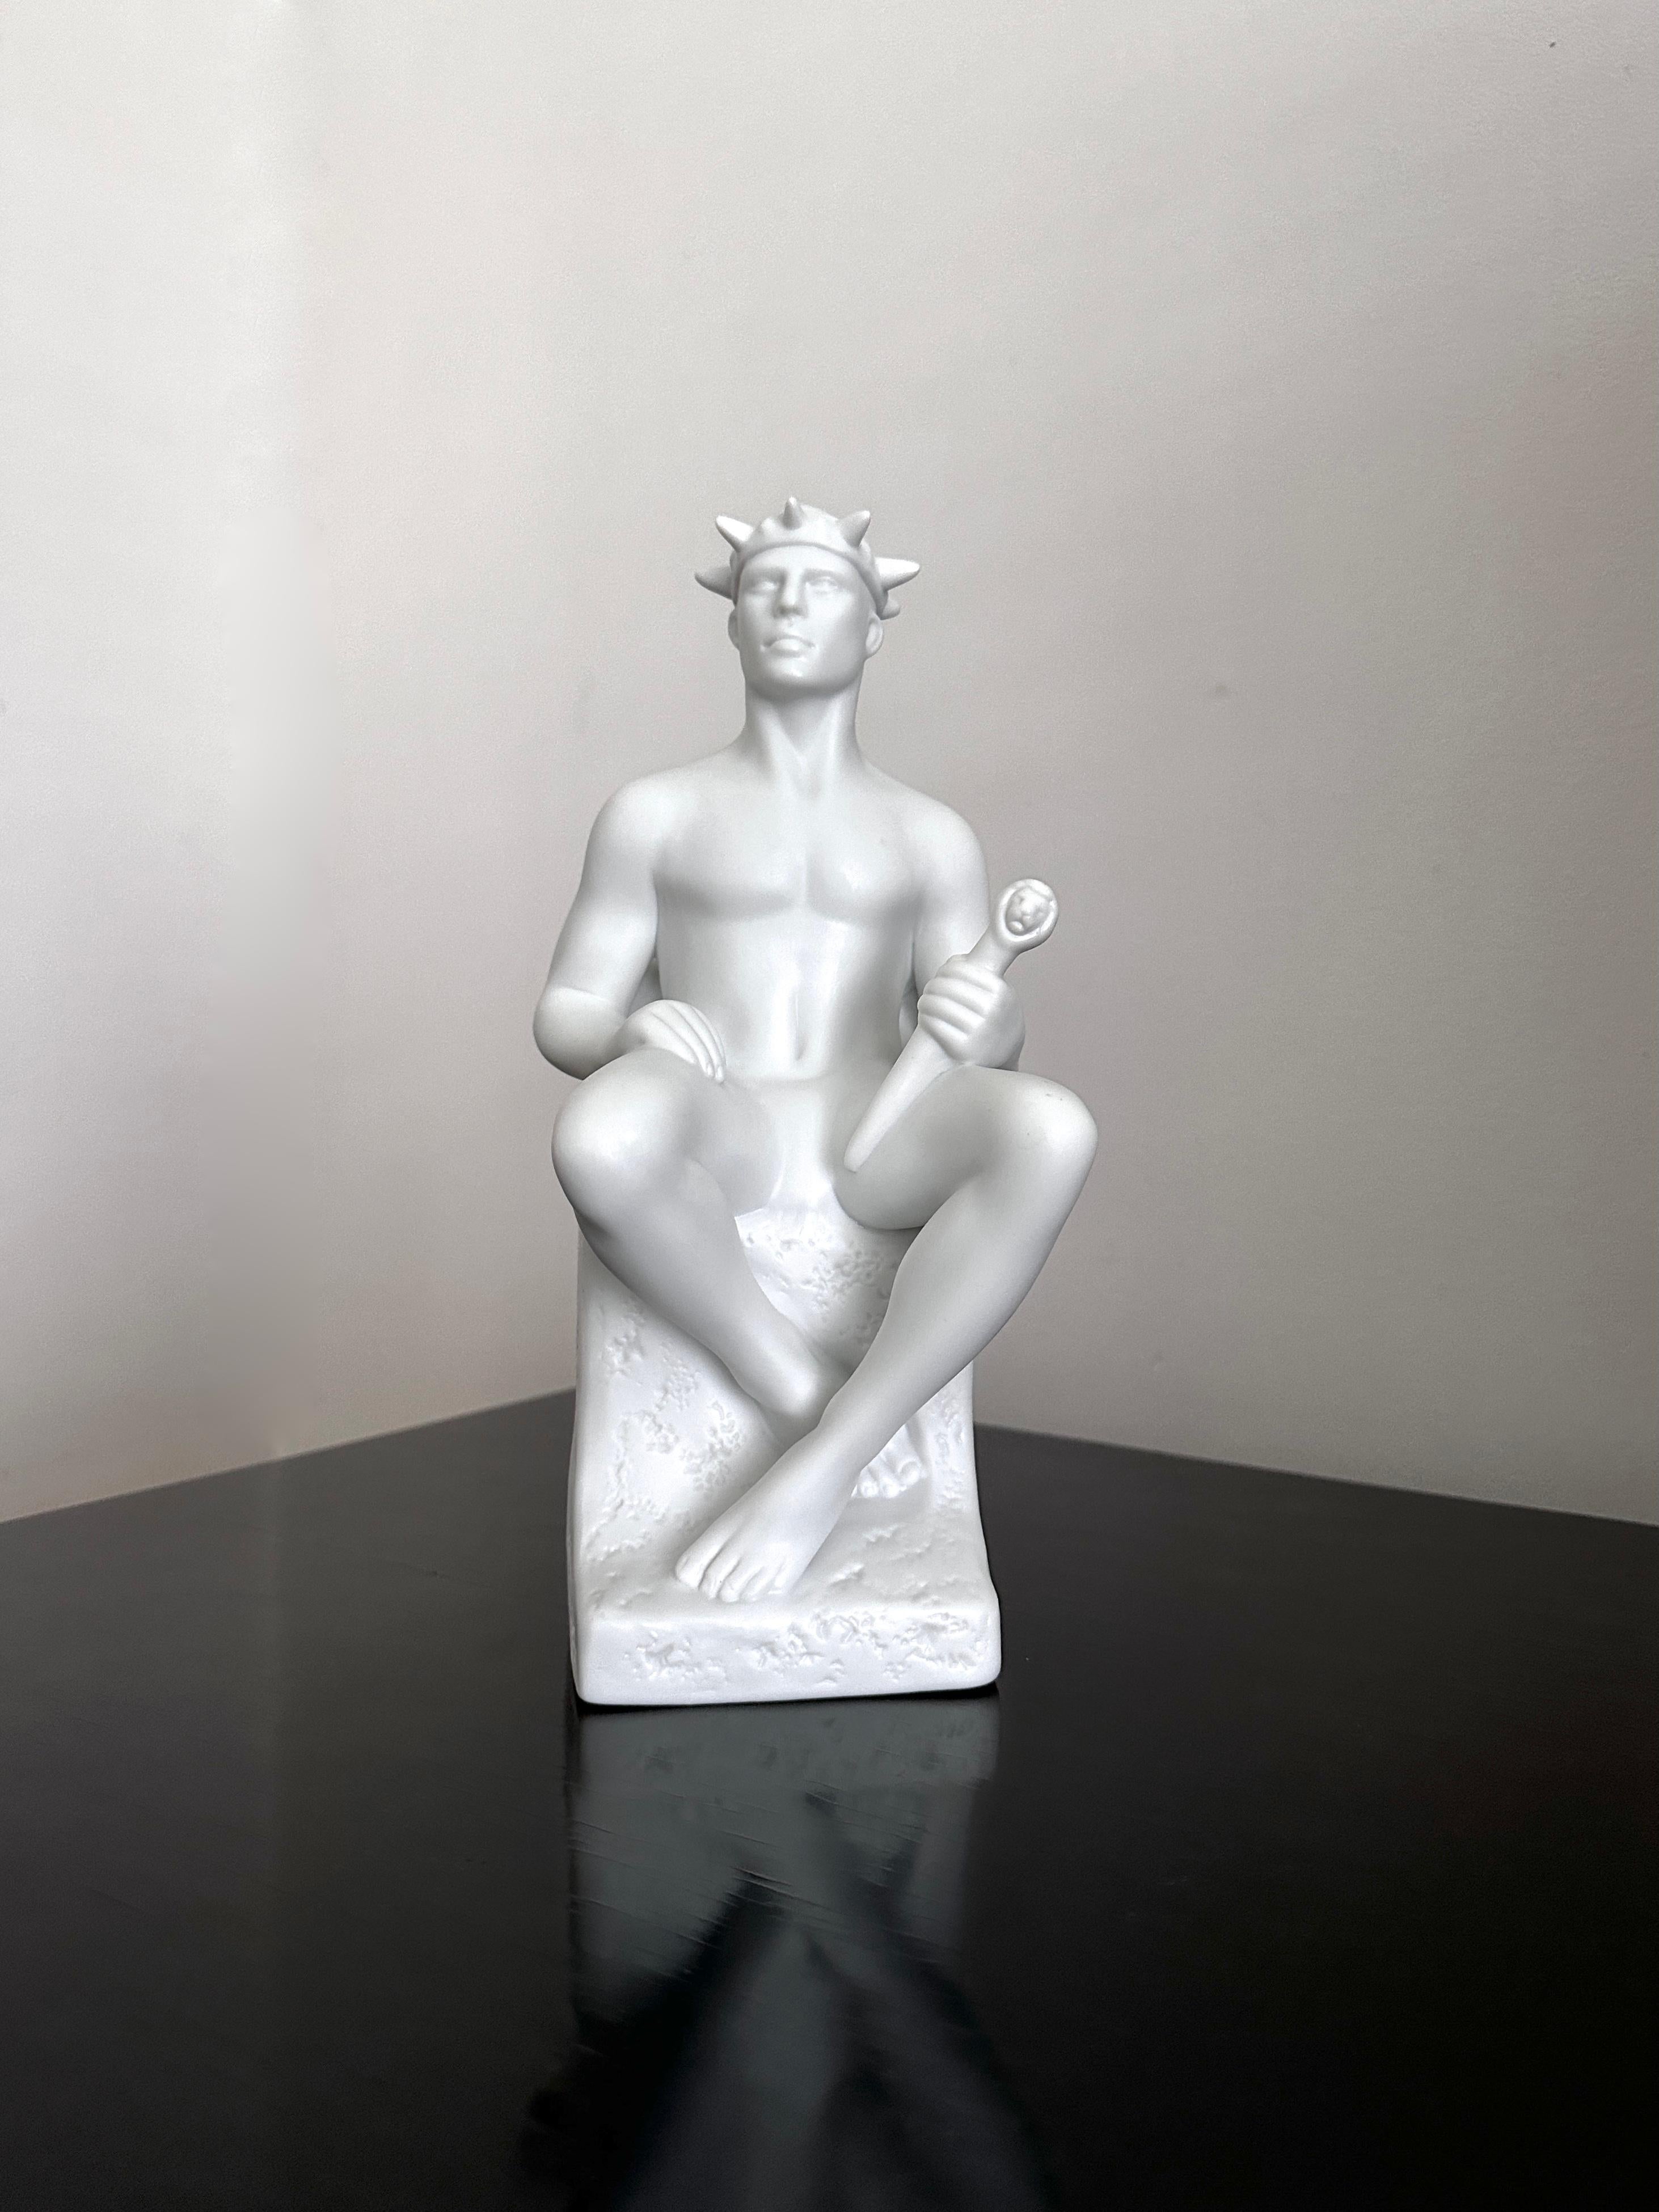 Beautiful bisque, matte white, statue of a man designed by Pia Langelund for Royal Copenhagen. The statue is one of the zodiac figures and this statue represents Leo. Designed probably sometime in the 1990's and has been discontinued.The sculpture